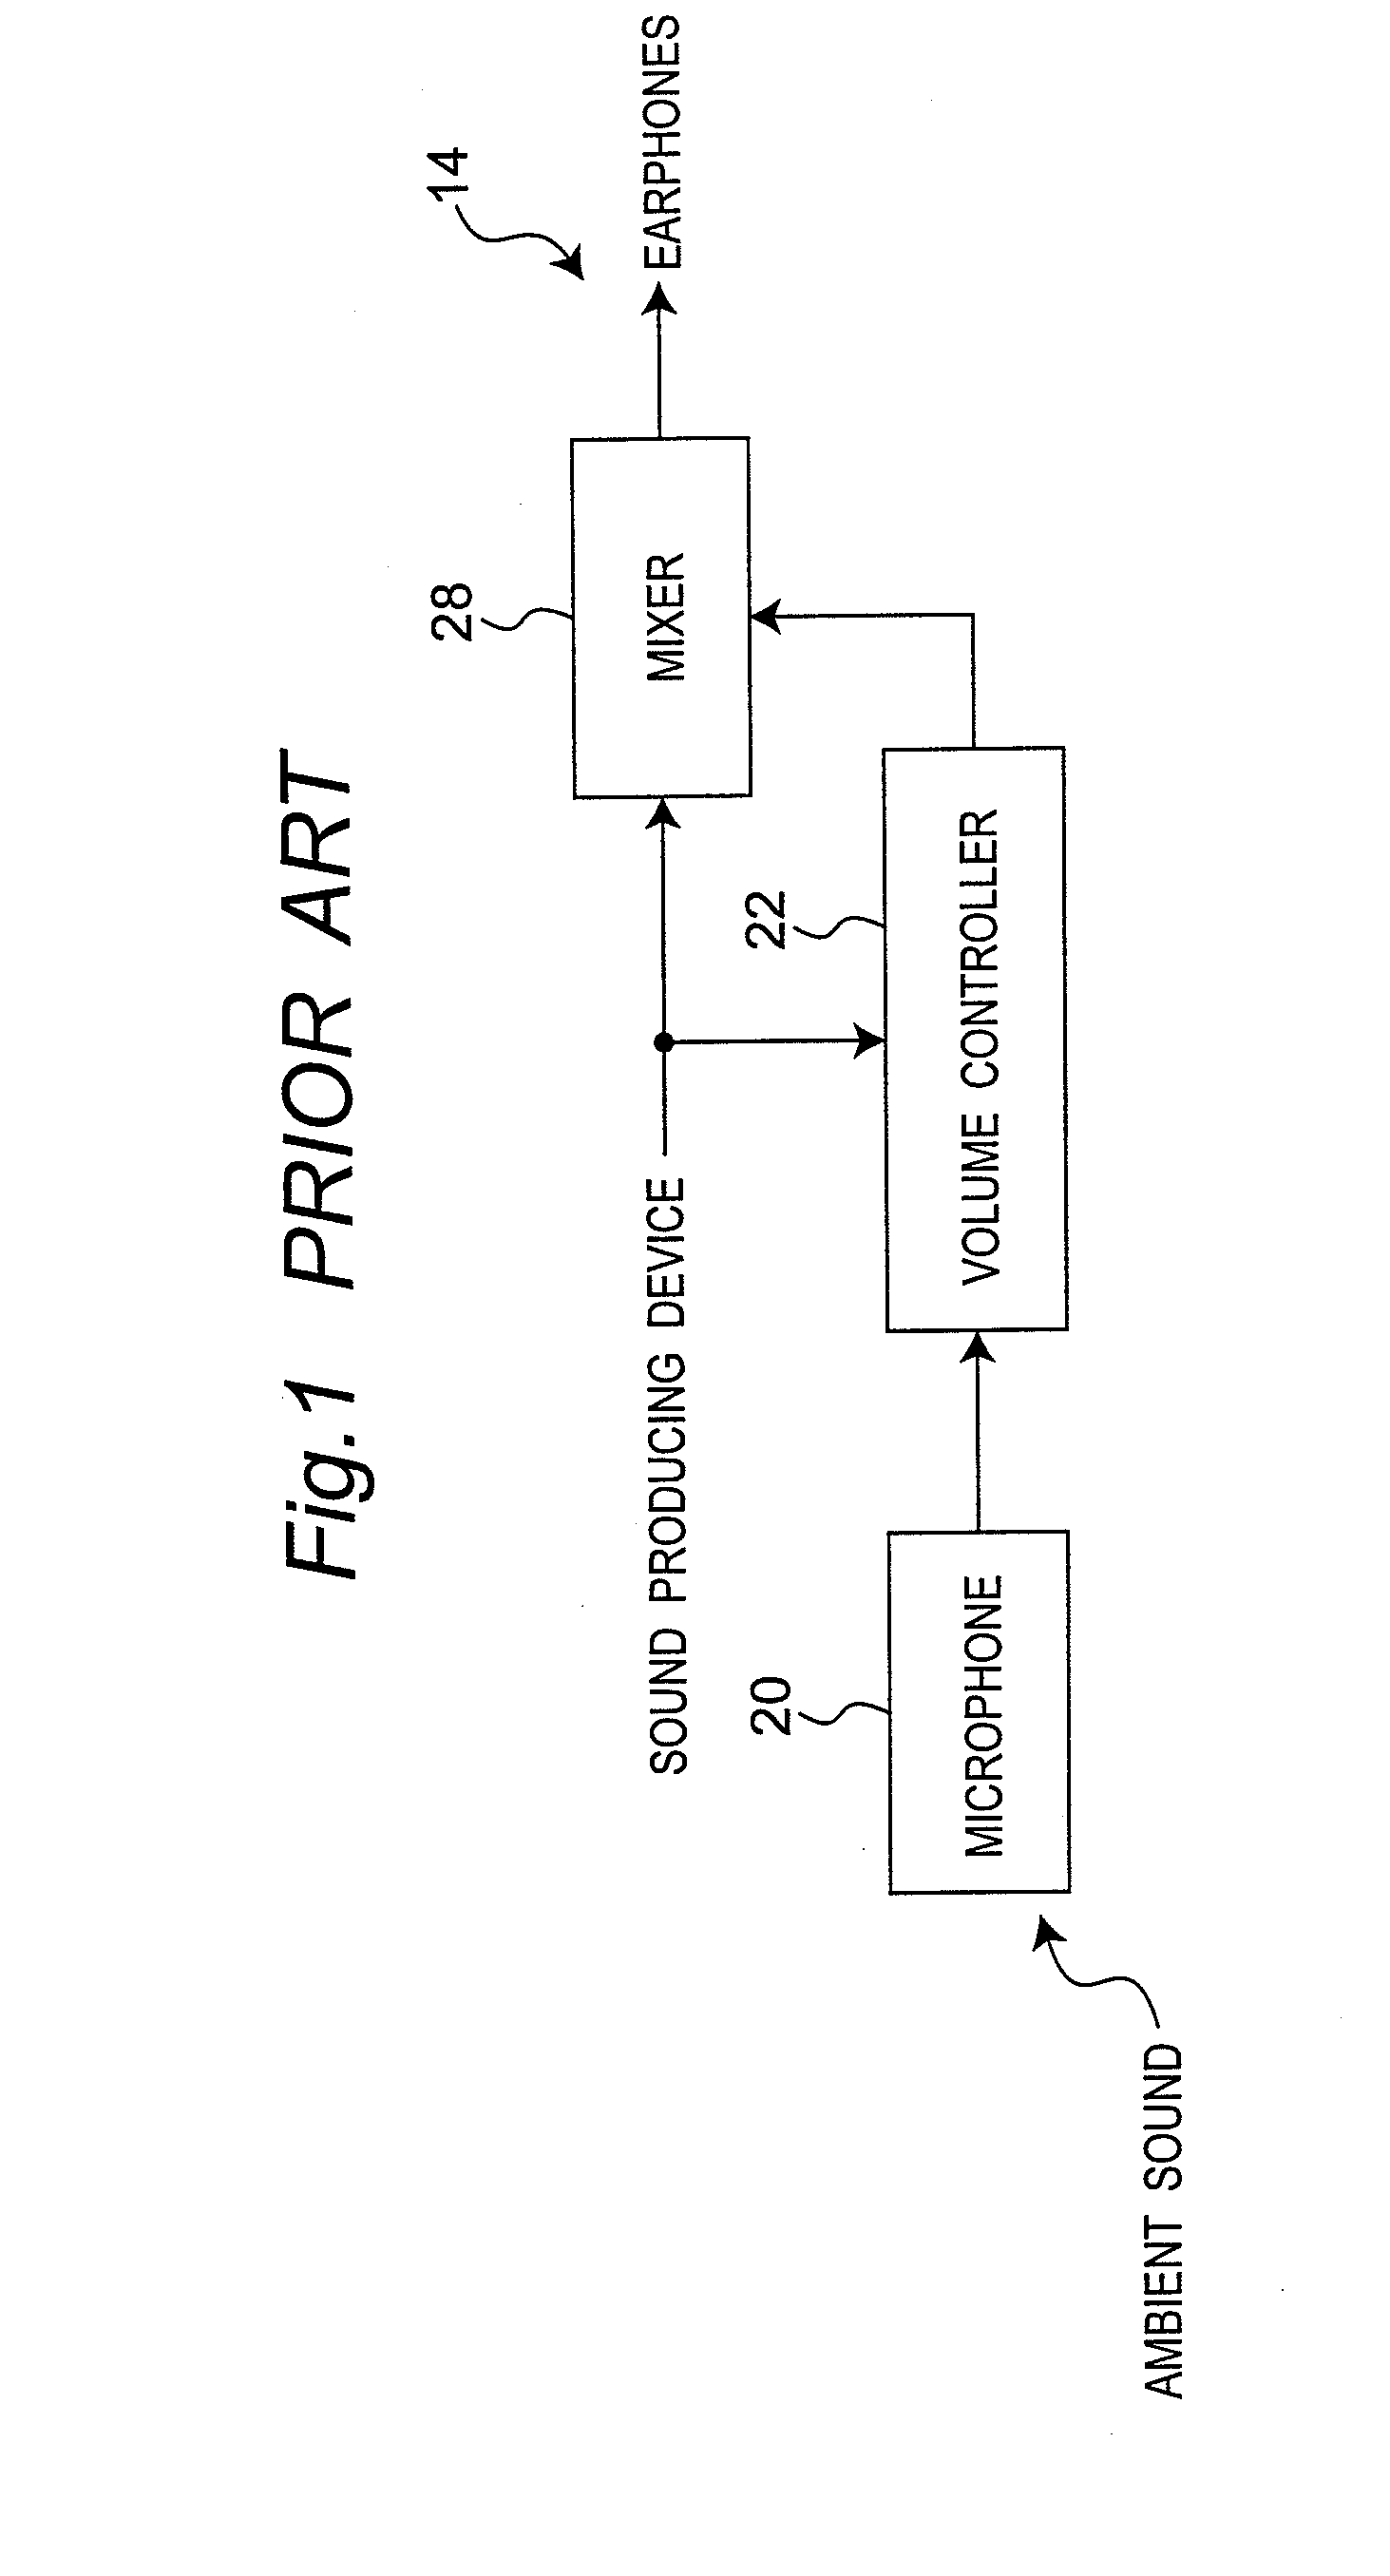 Apparatus and method for detecting sound